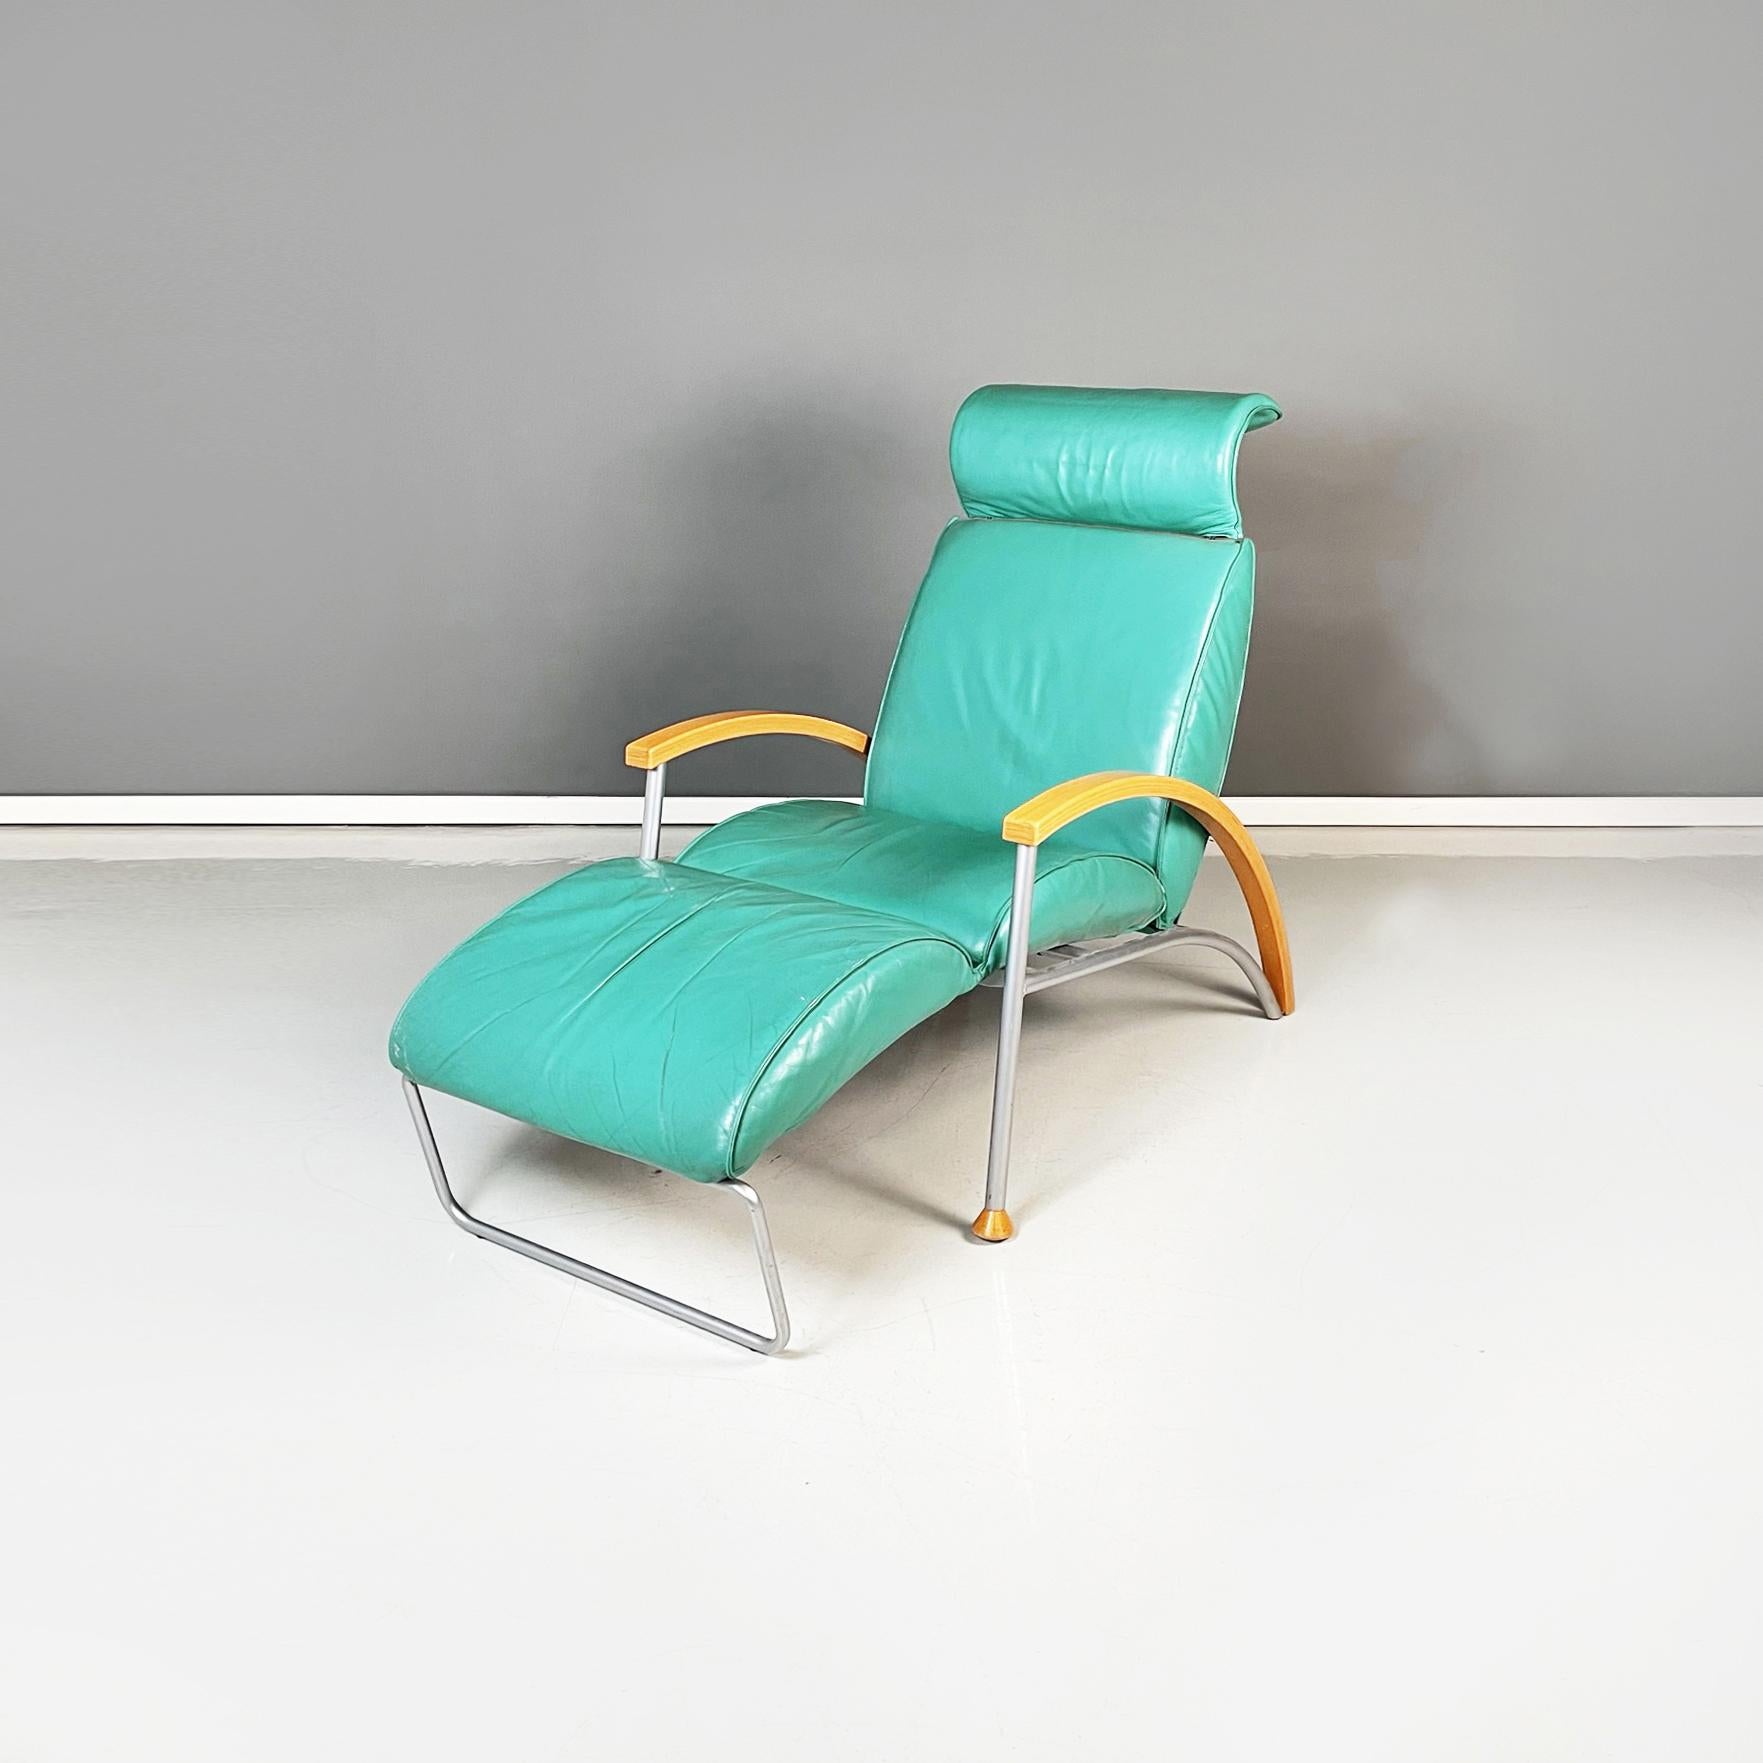 Italian modern Armchair in aqua-green leather, wood and metal, 1980s
Armchair upholstered in aqua-green leather. The seat is extendable thanks to a manual mechanism. The backrest is inclined. The curved armrests have a tubular metal and light wood